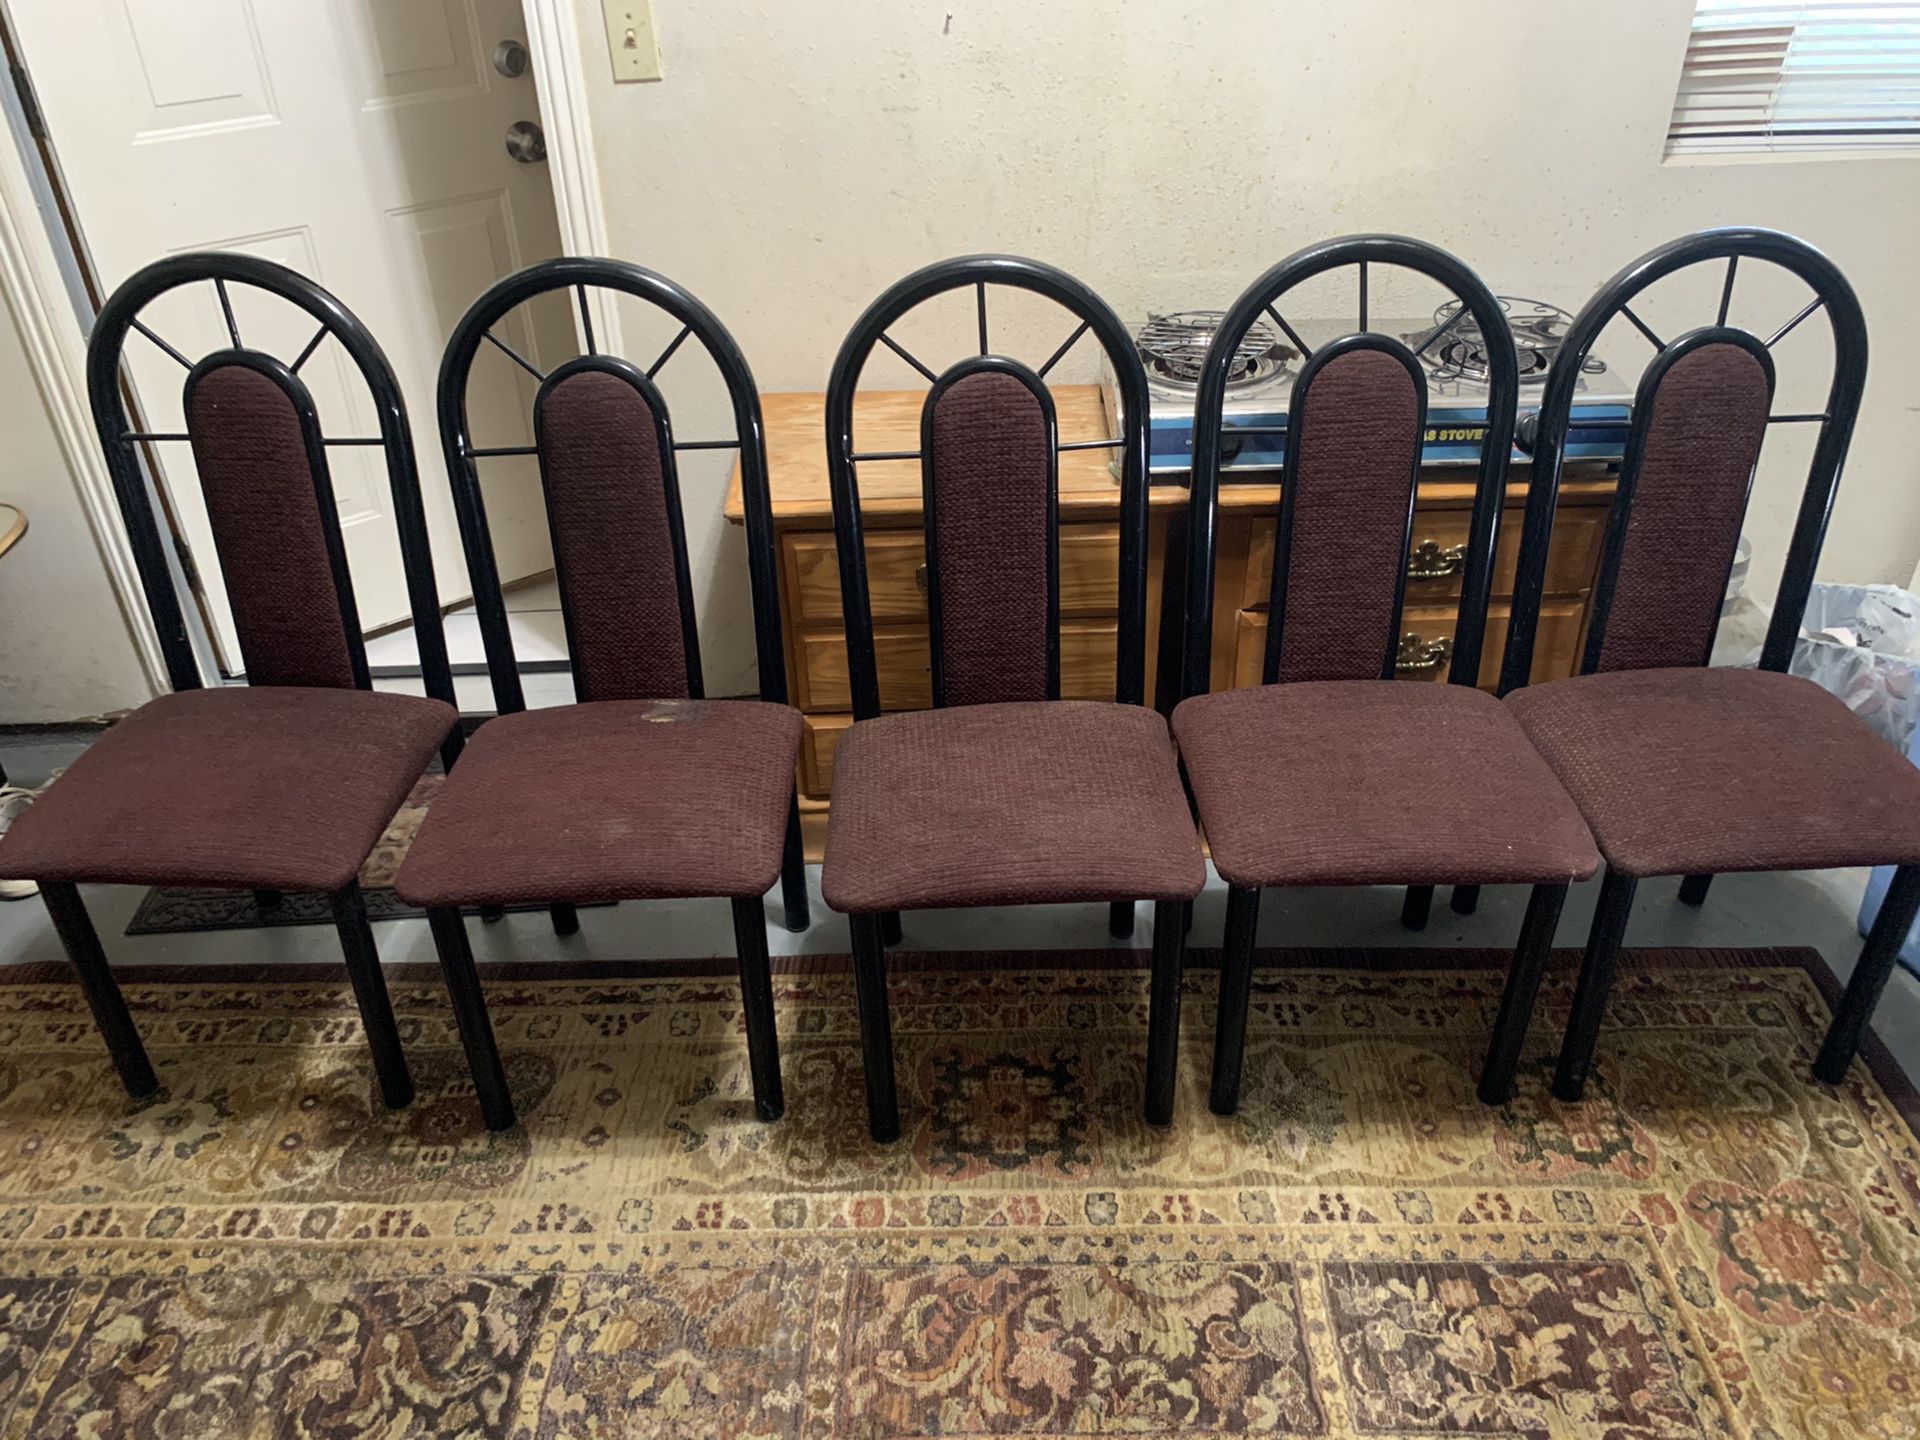 5 chairs $40